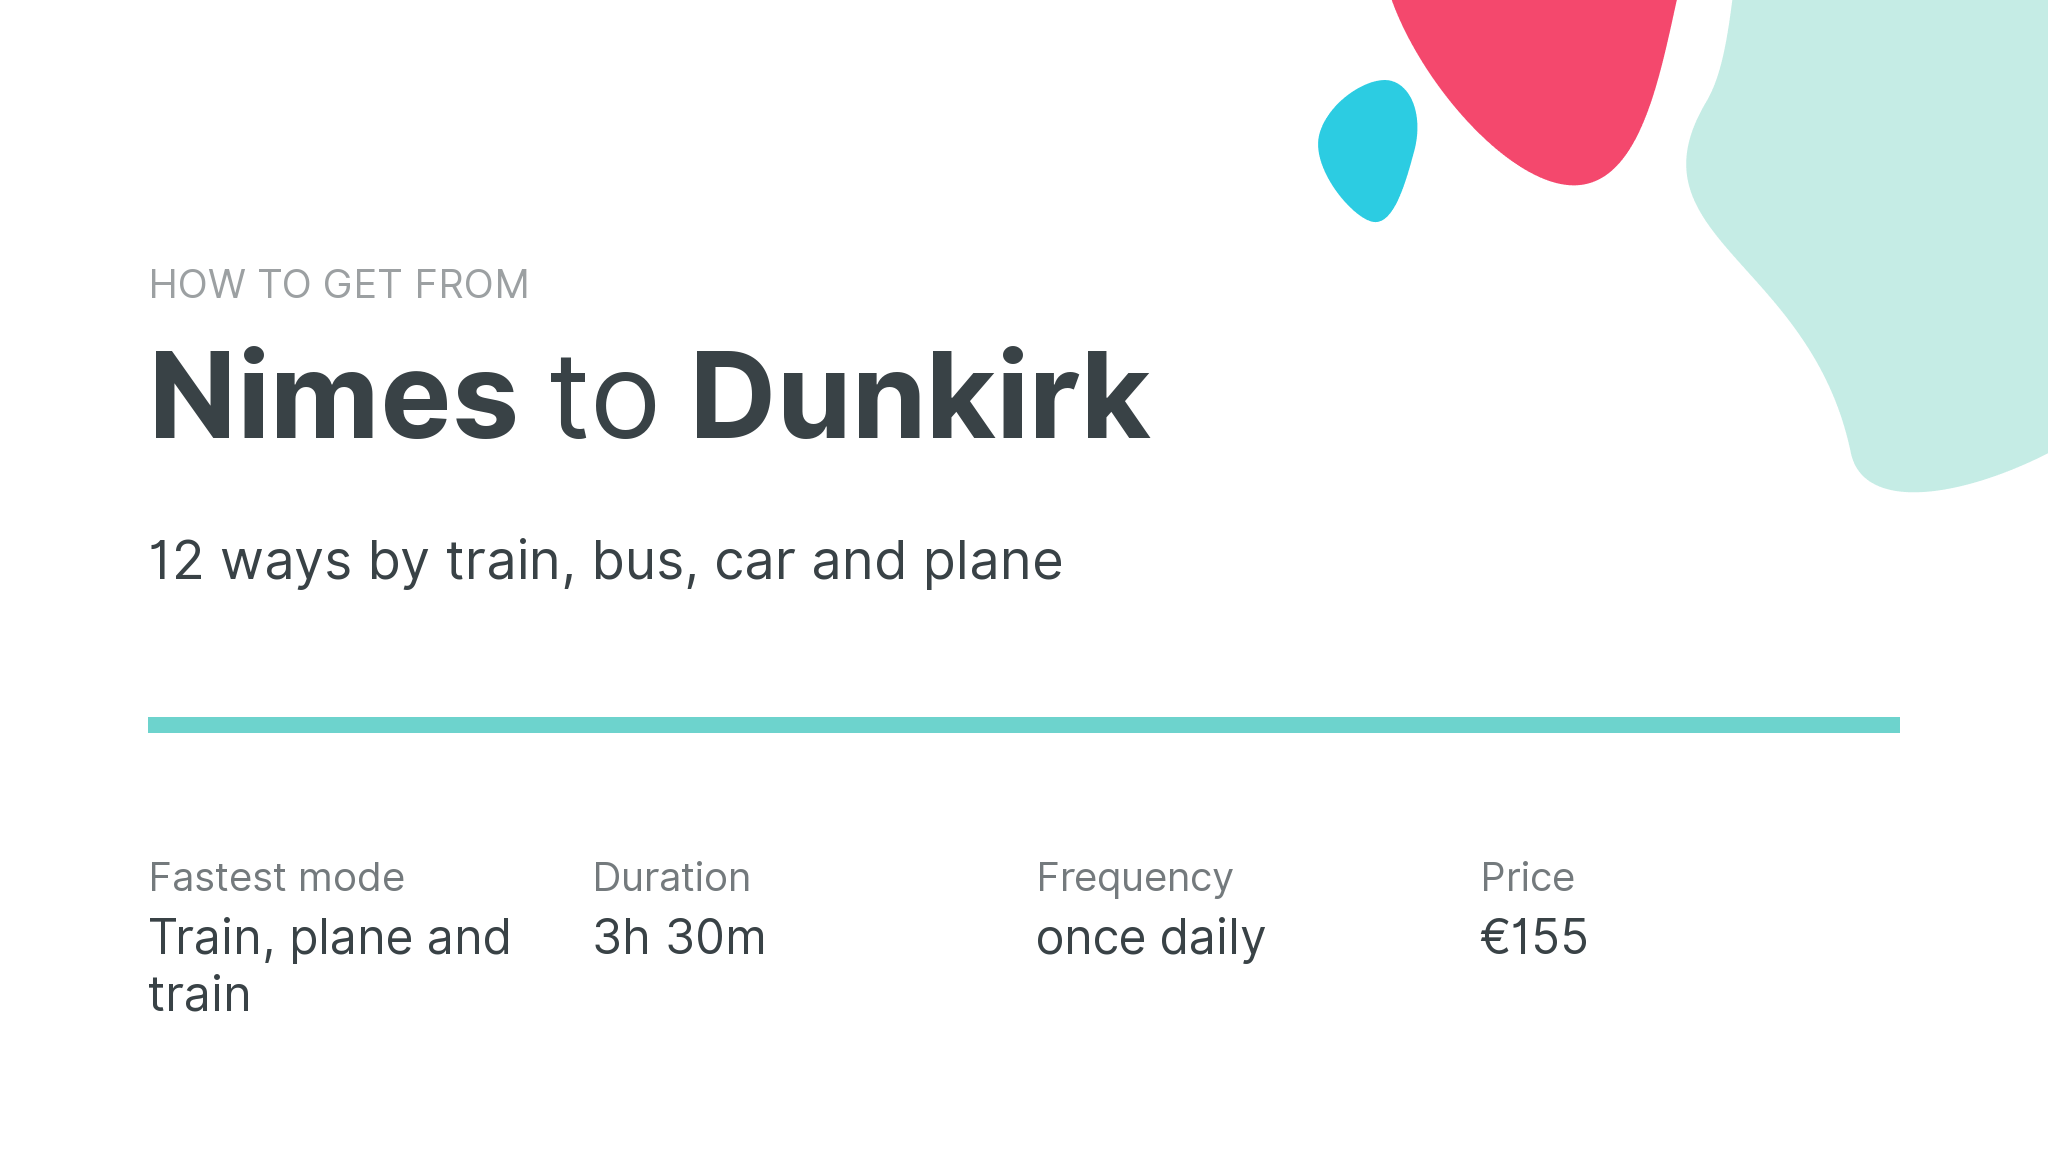 How do I get from Nimes to Dunkirk